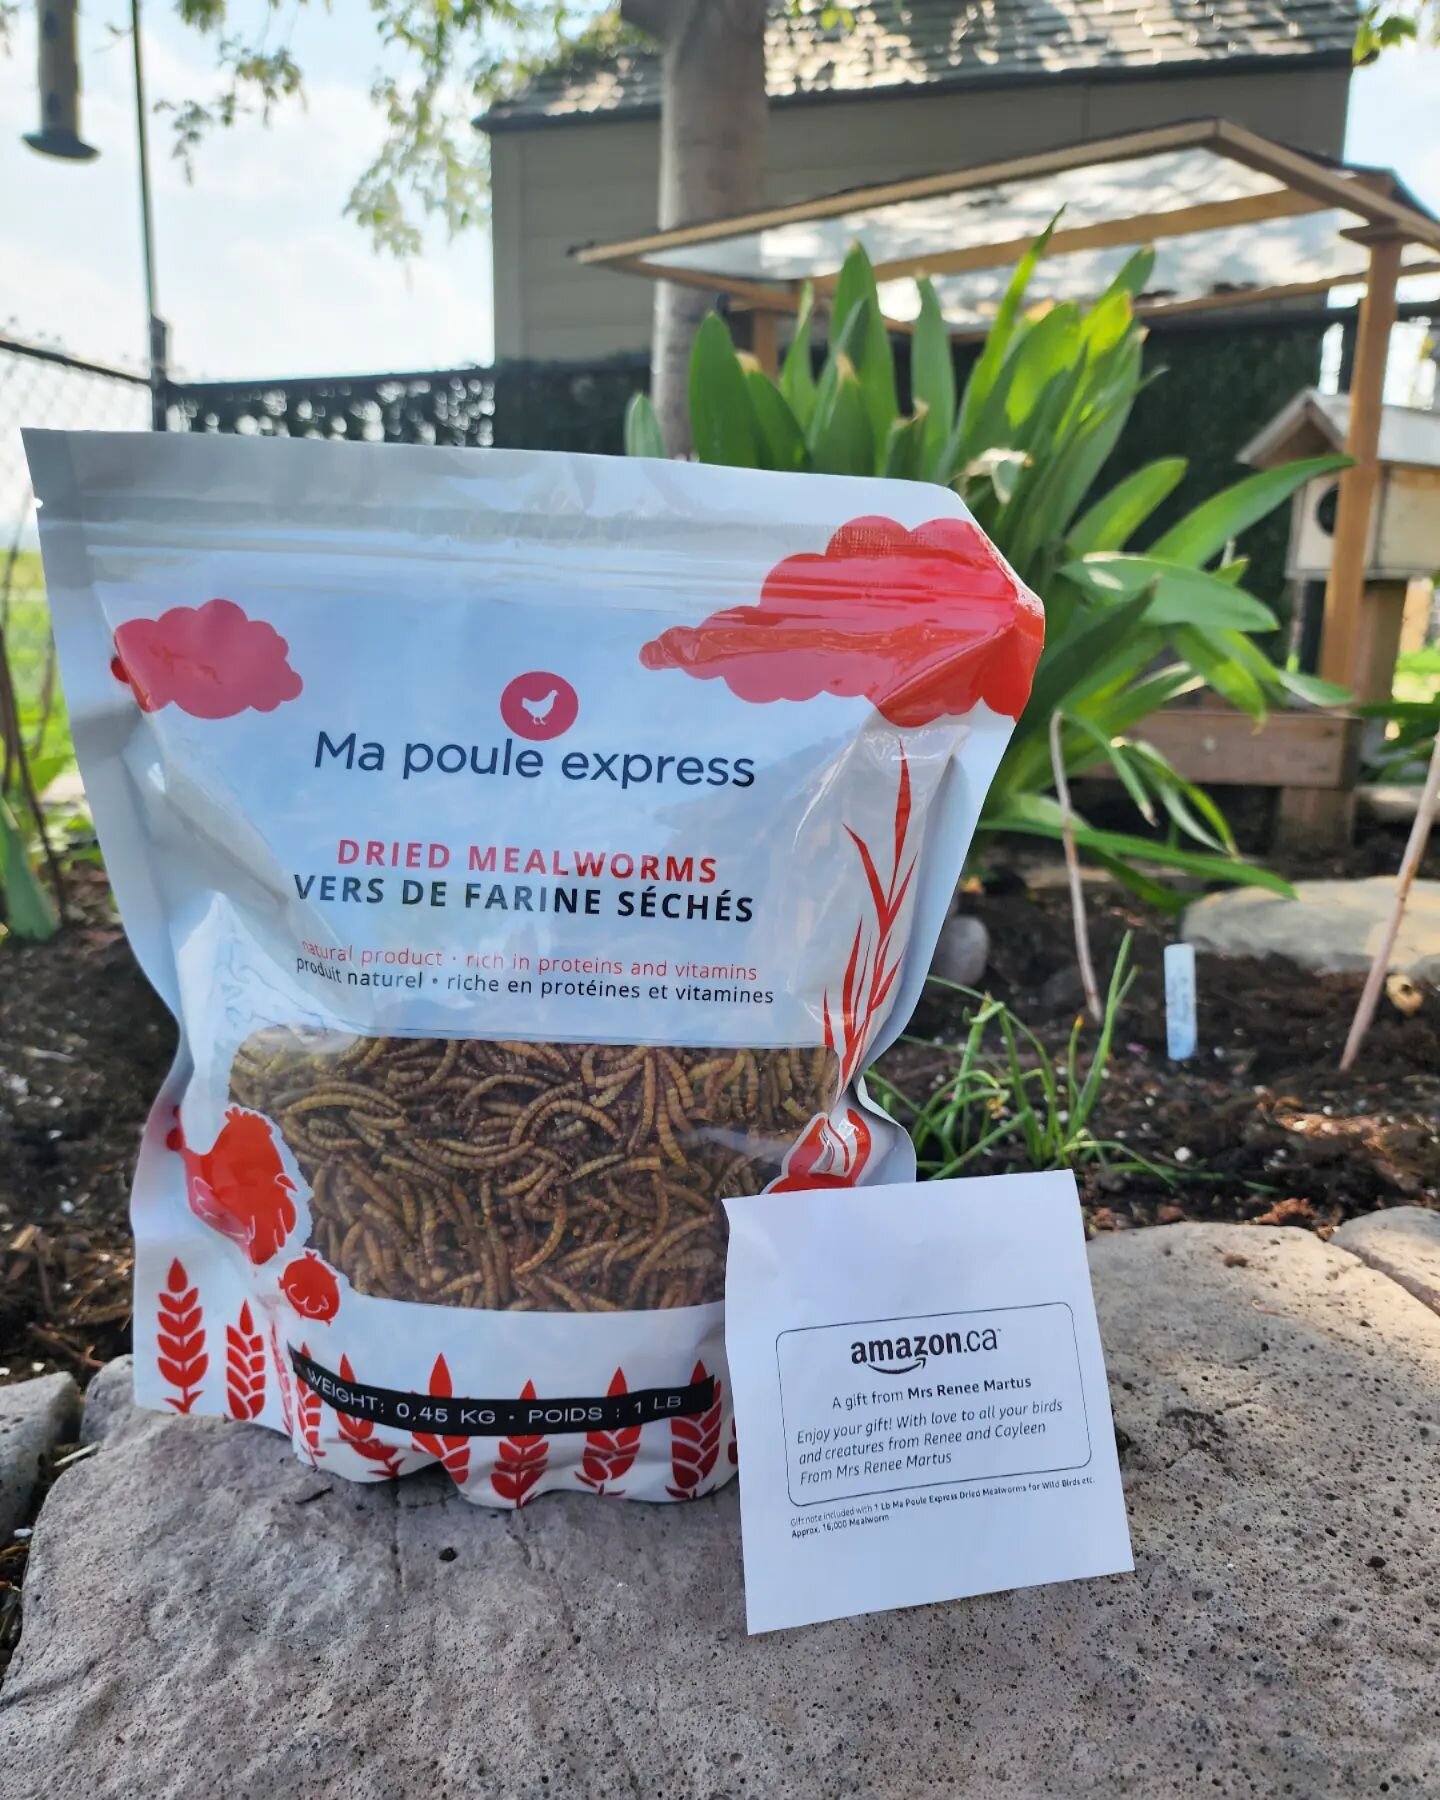 Thank you, Renee and Cayleen!!! Your bag of worms will go along way to feed the nesting birds right now!
#mealworms #birdfeed #mapouleexpress